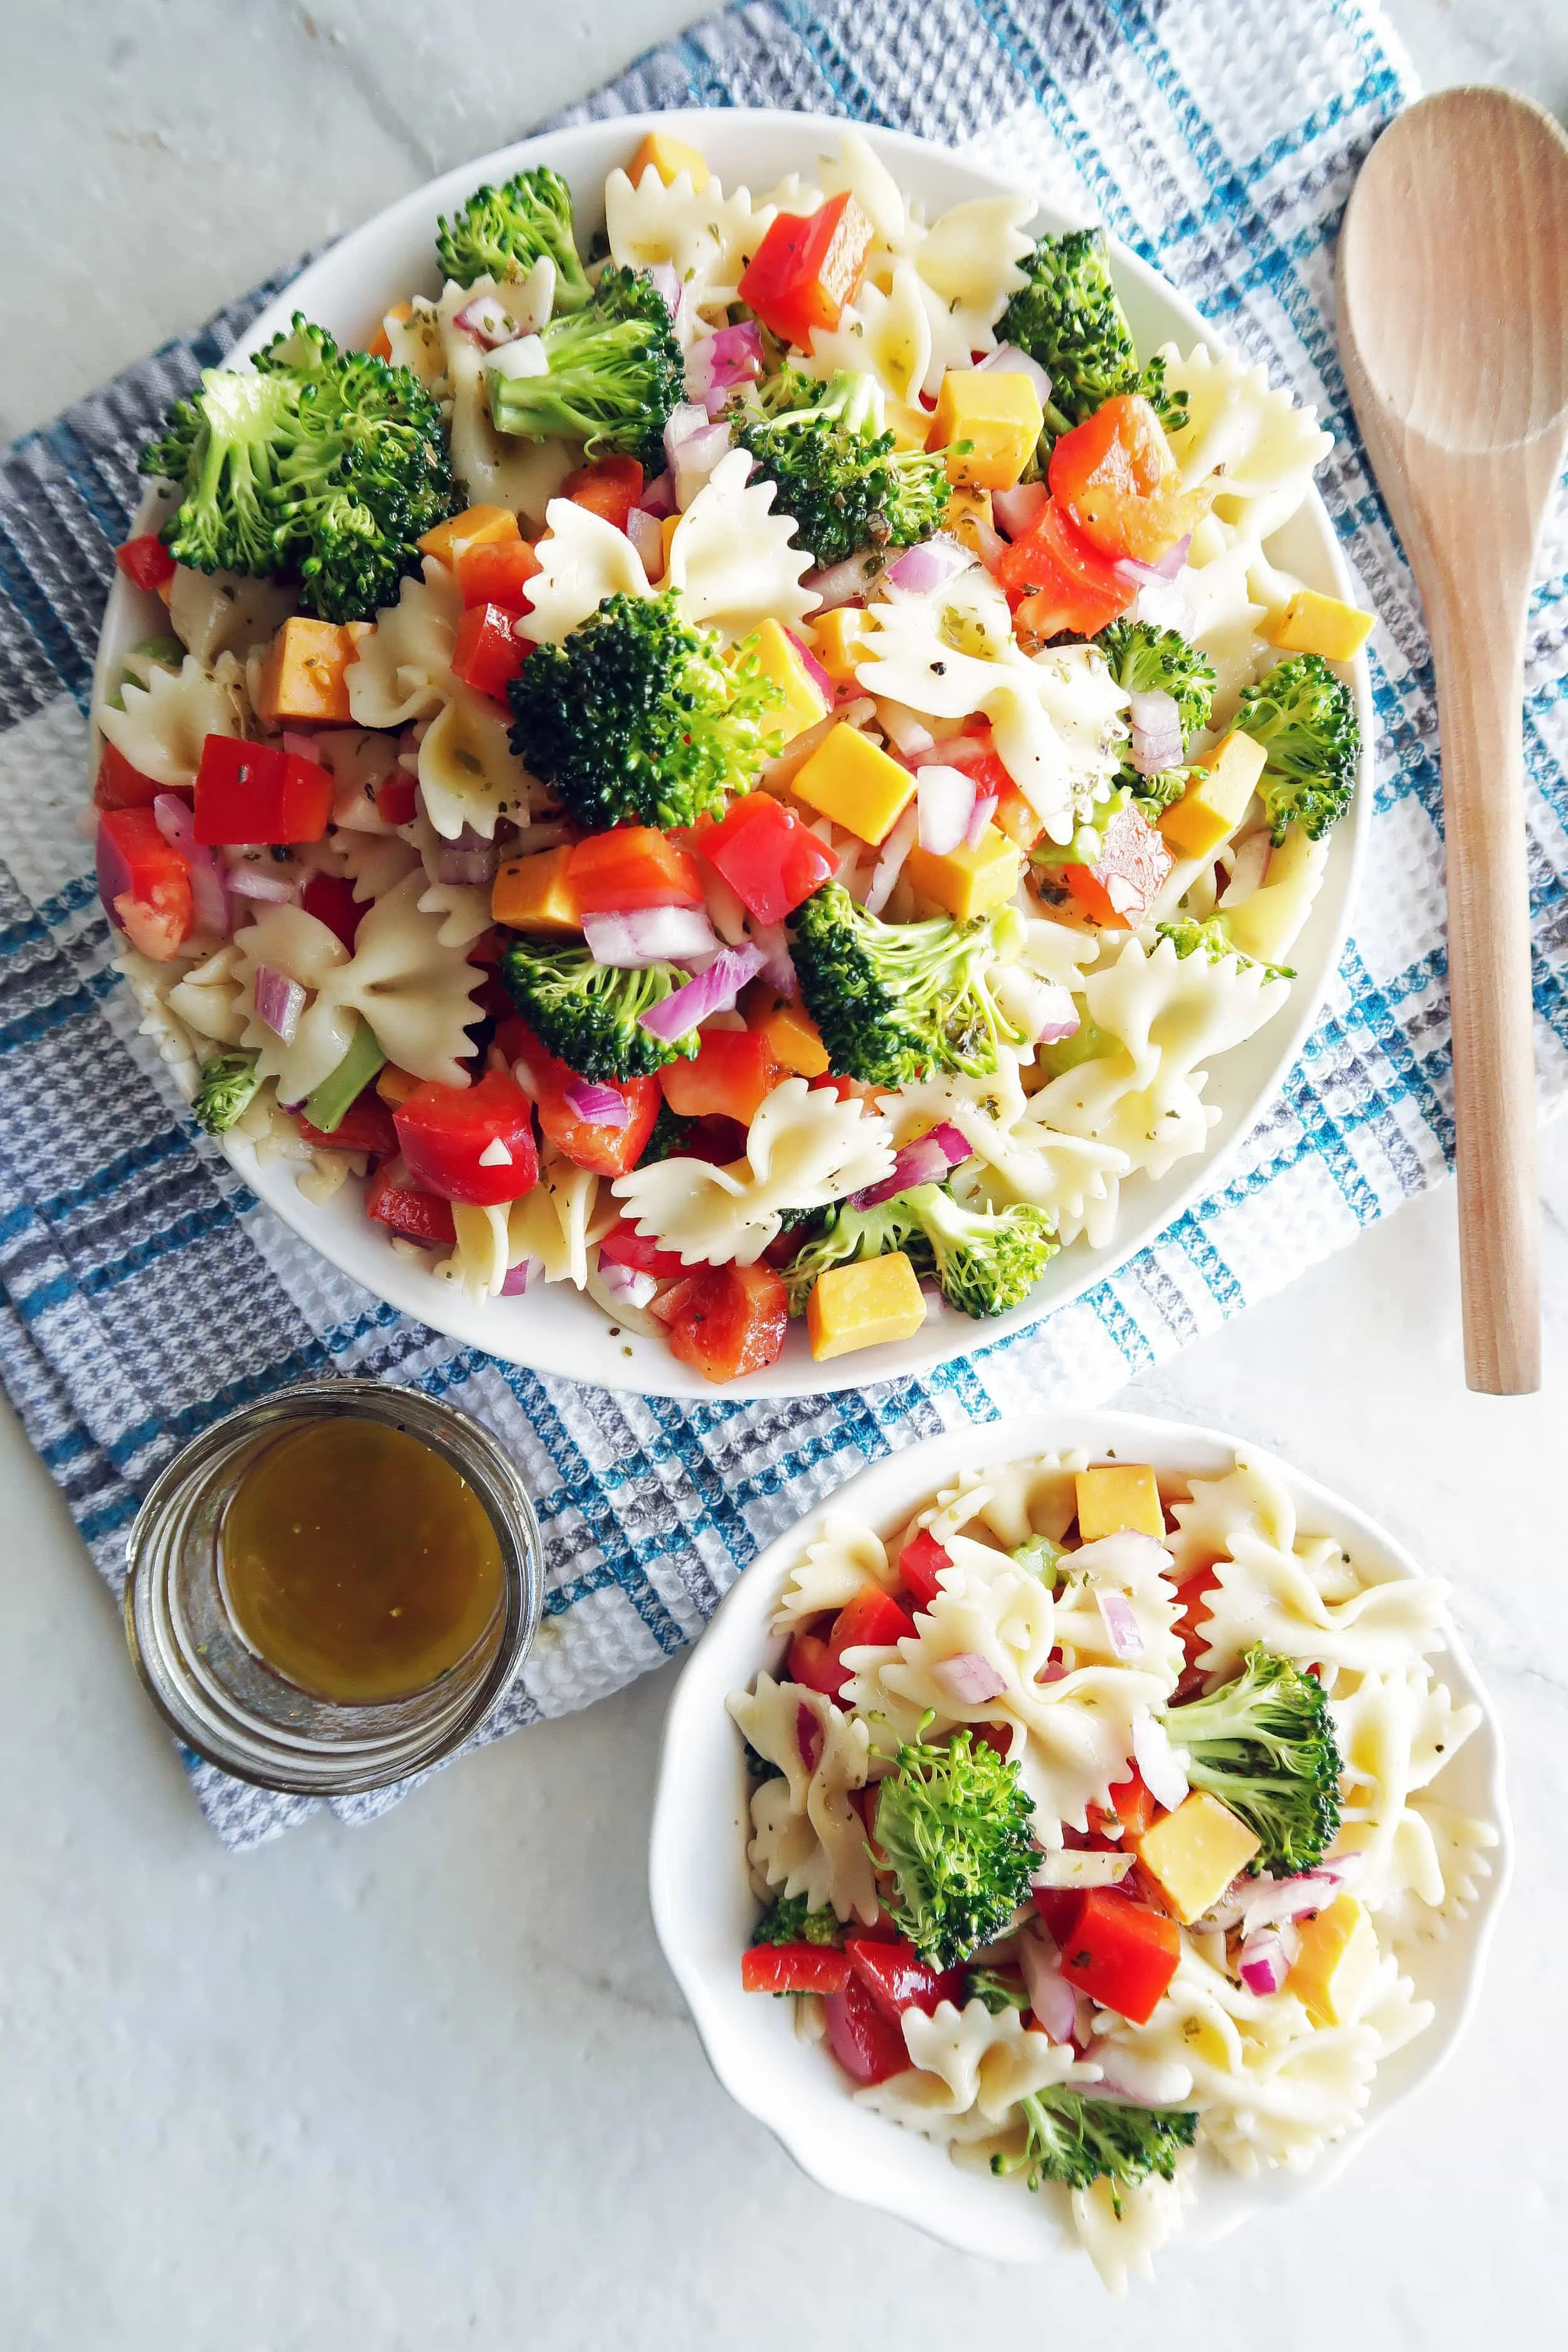 Broccoli Cheddar Pasta Salad with Tangy Italian Vinaigrette in a large pasta bowl, a small bowl of pasta salad, dressing in a small jar, and wooden spoon to the side.